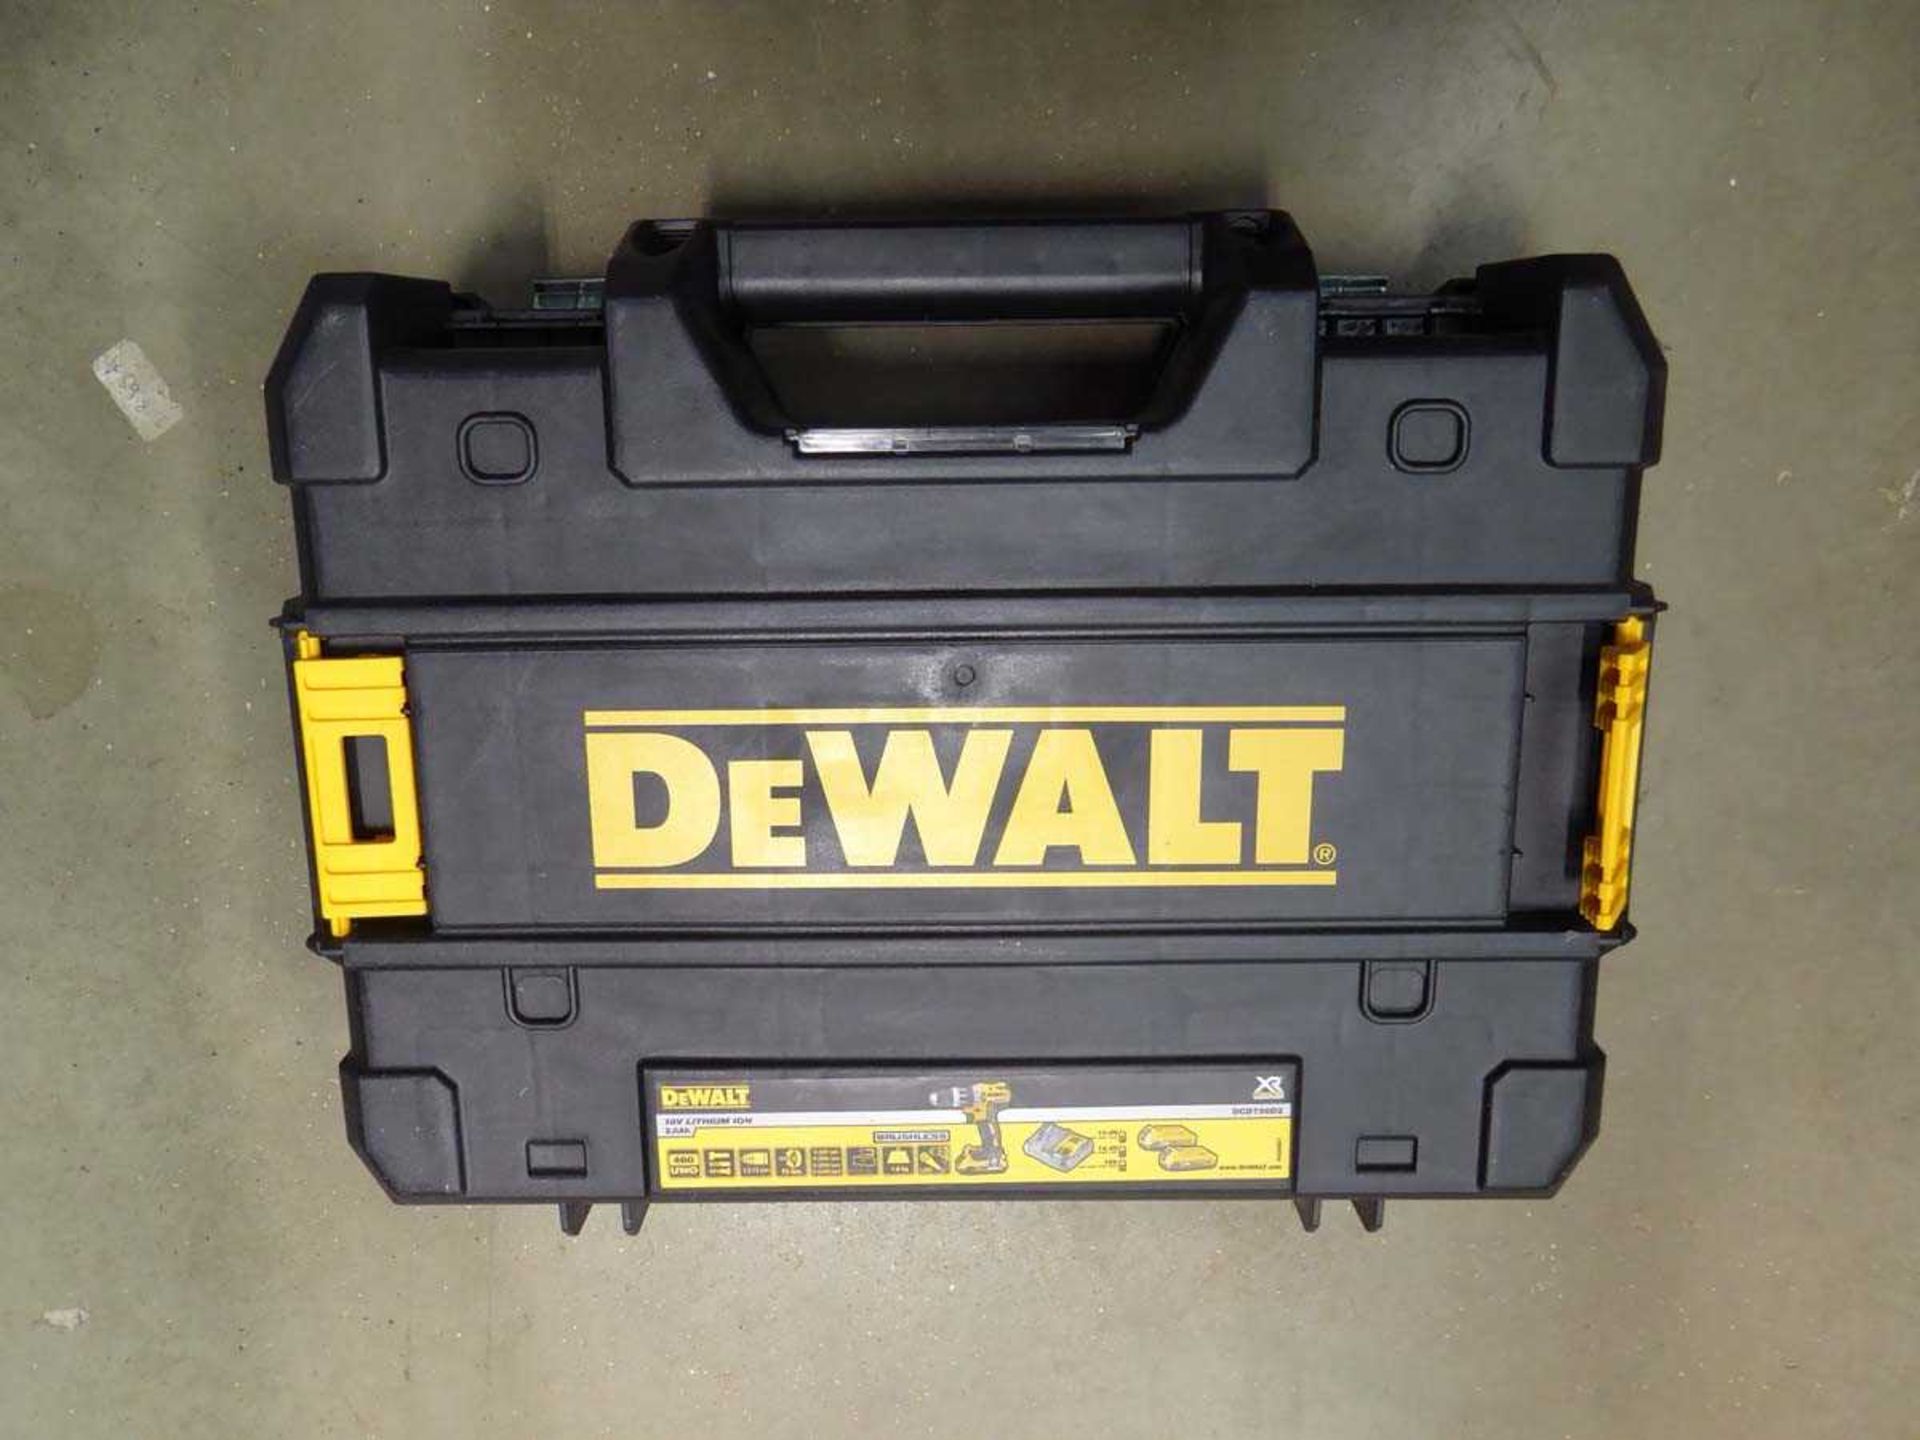 +VAT DeWalt battery drill with 2 batteries and charger - Image 2 of 2